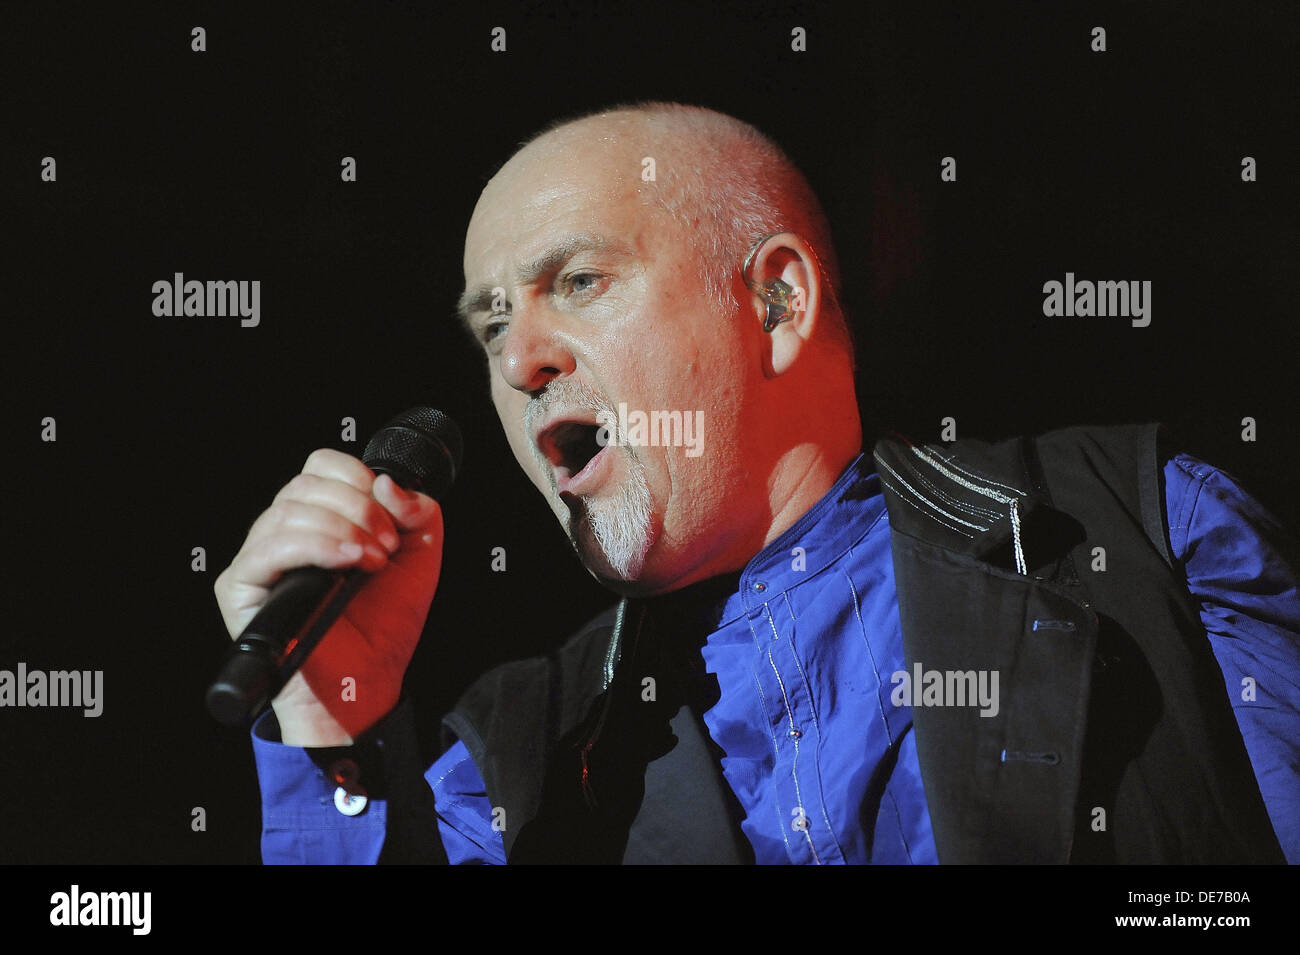 Santiago Chile 24 March 2009 the English singer Peter Gabriel during a ...